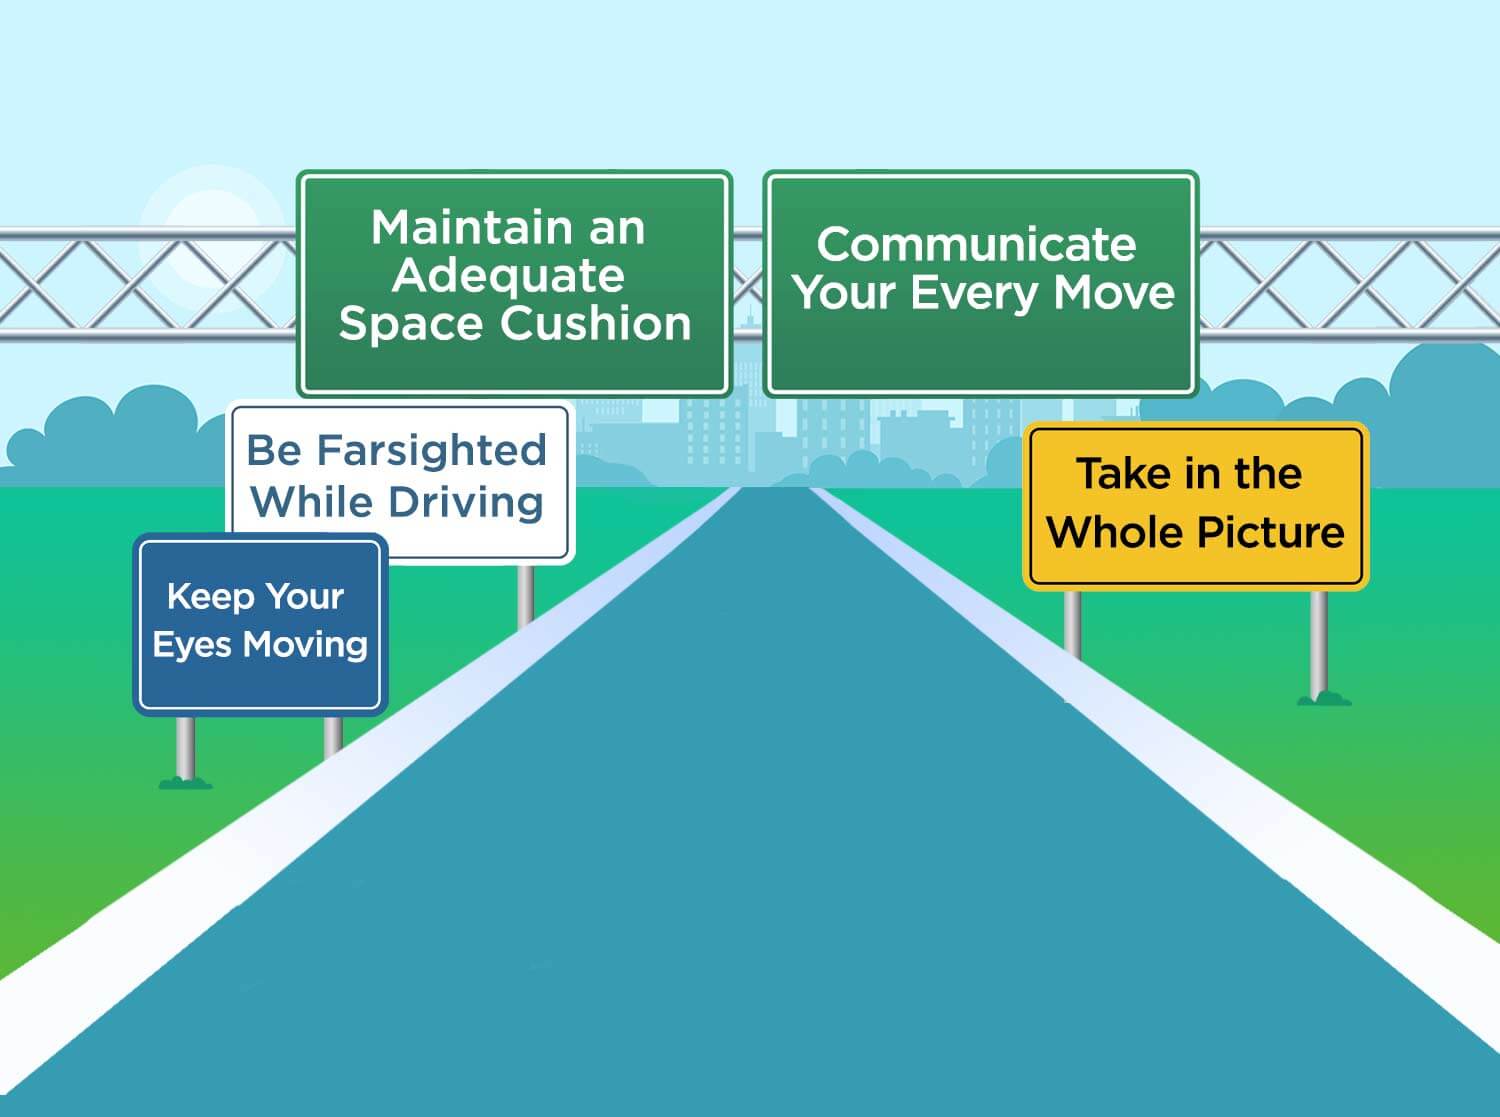 Driving safe and fast is possible. Keep reading to learn how to drive fast.